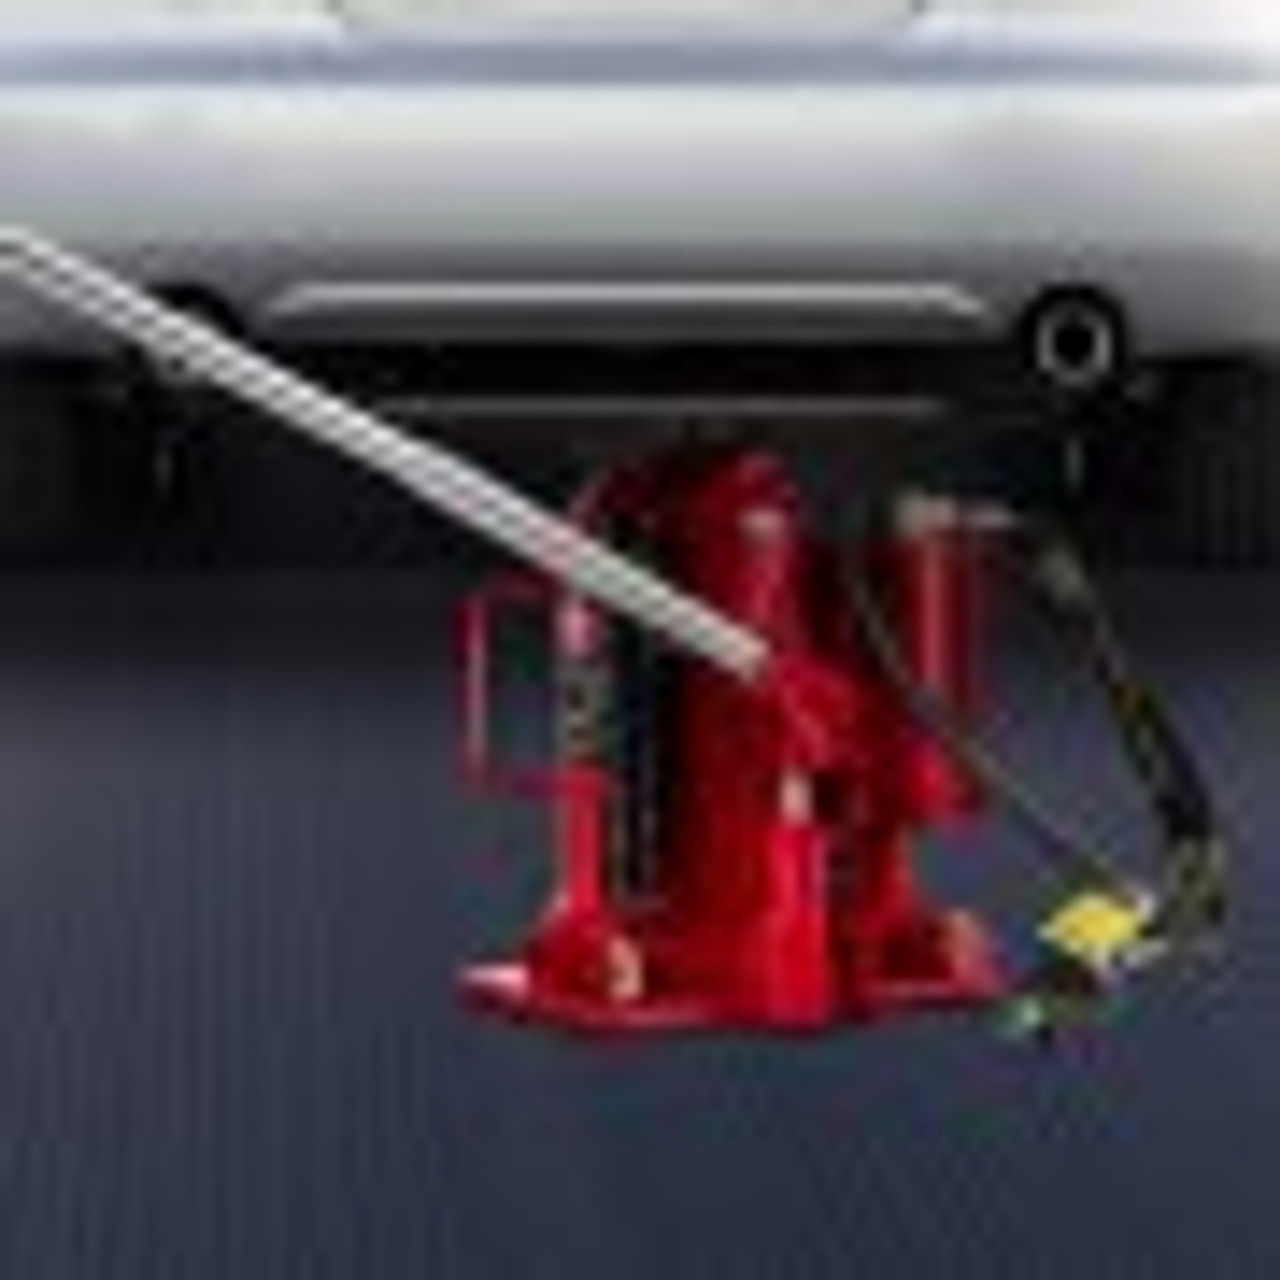 Air Hydraulic Bottle Jack, 20 Ton/44092 lbs Capacity, with Manual Hand Pump, Heavy Duty Auto Truck Travel Trailer Repair Lift, Red